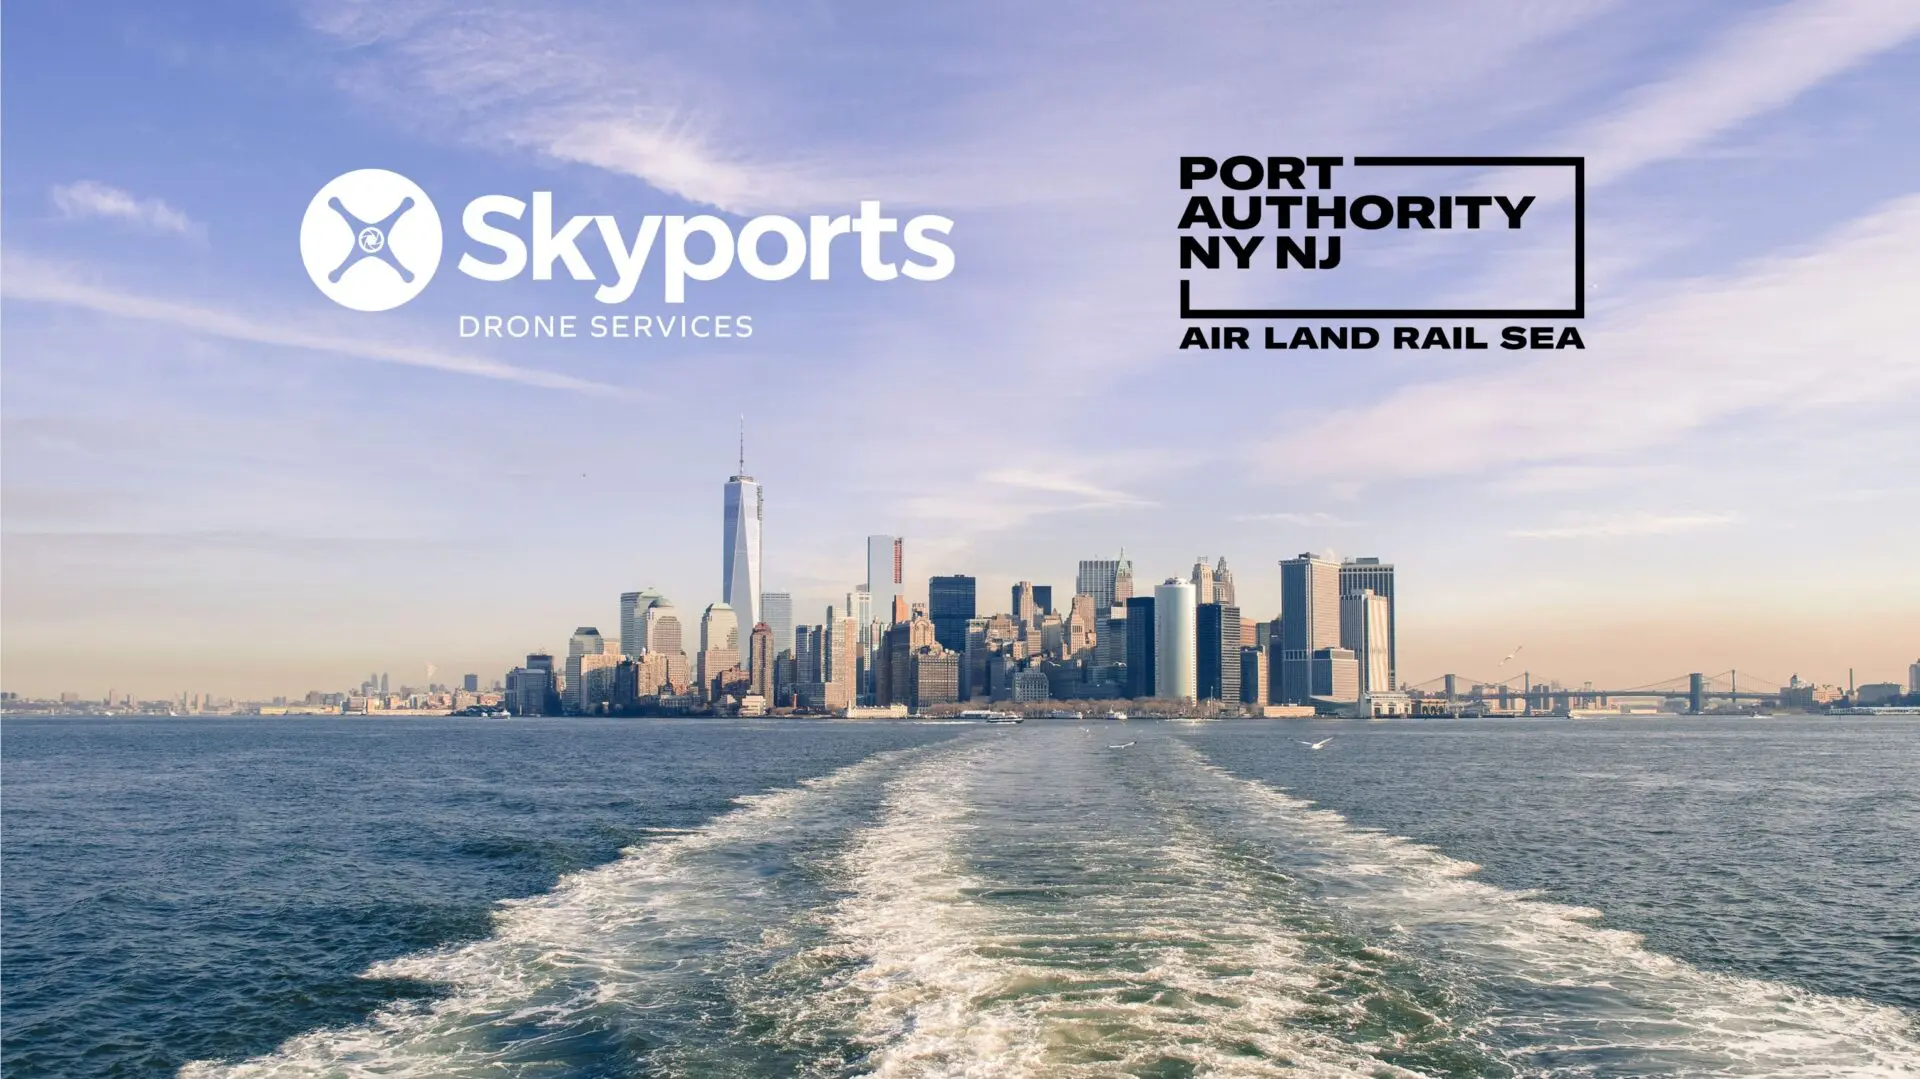 A city skyline across the water with sky and wake of a boat in the foreground, overlaid with logos for "skyports drone services" and "port authority nynj.